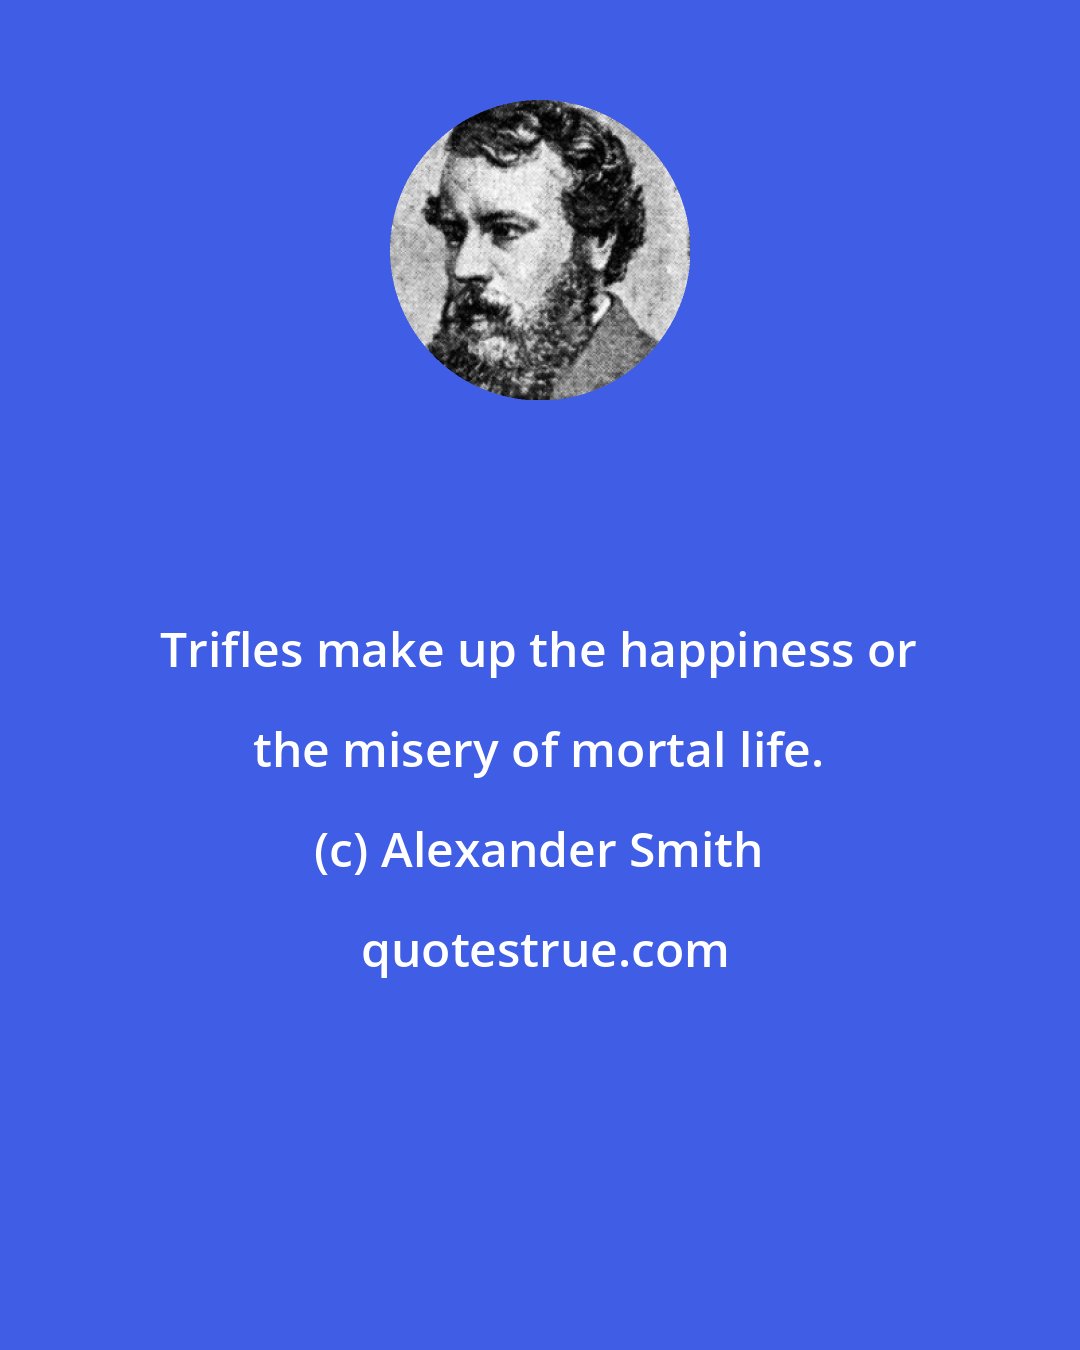 Alexander Smith: Trifles make up the happiness or the misery of mortal life.